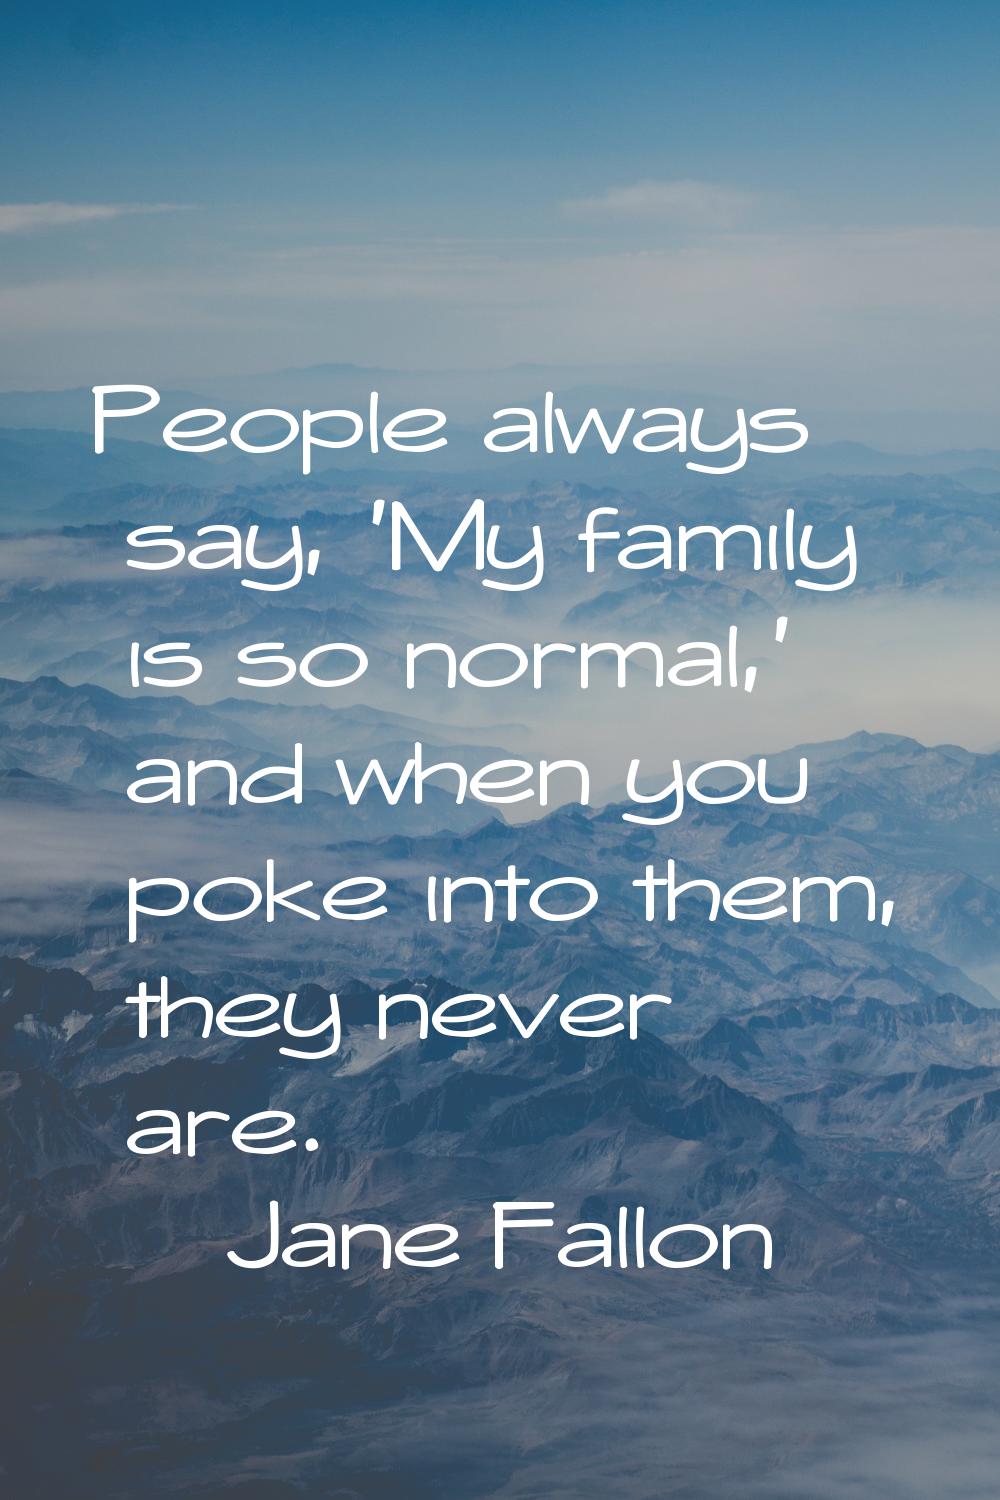 People always say, 'My family is so normal,' and when you poke into them, they never are.